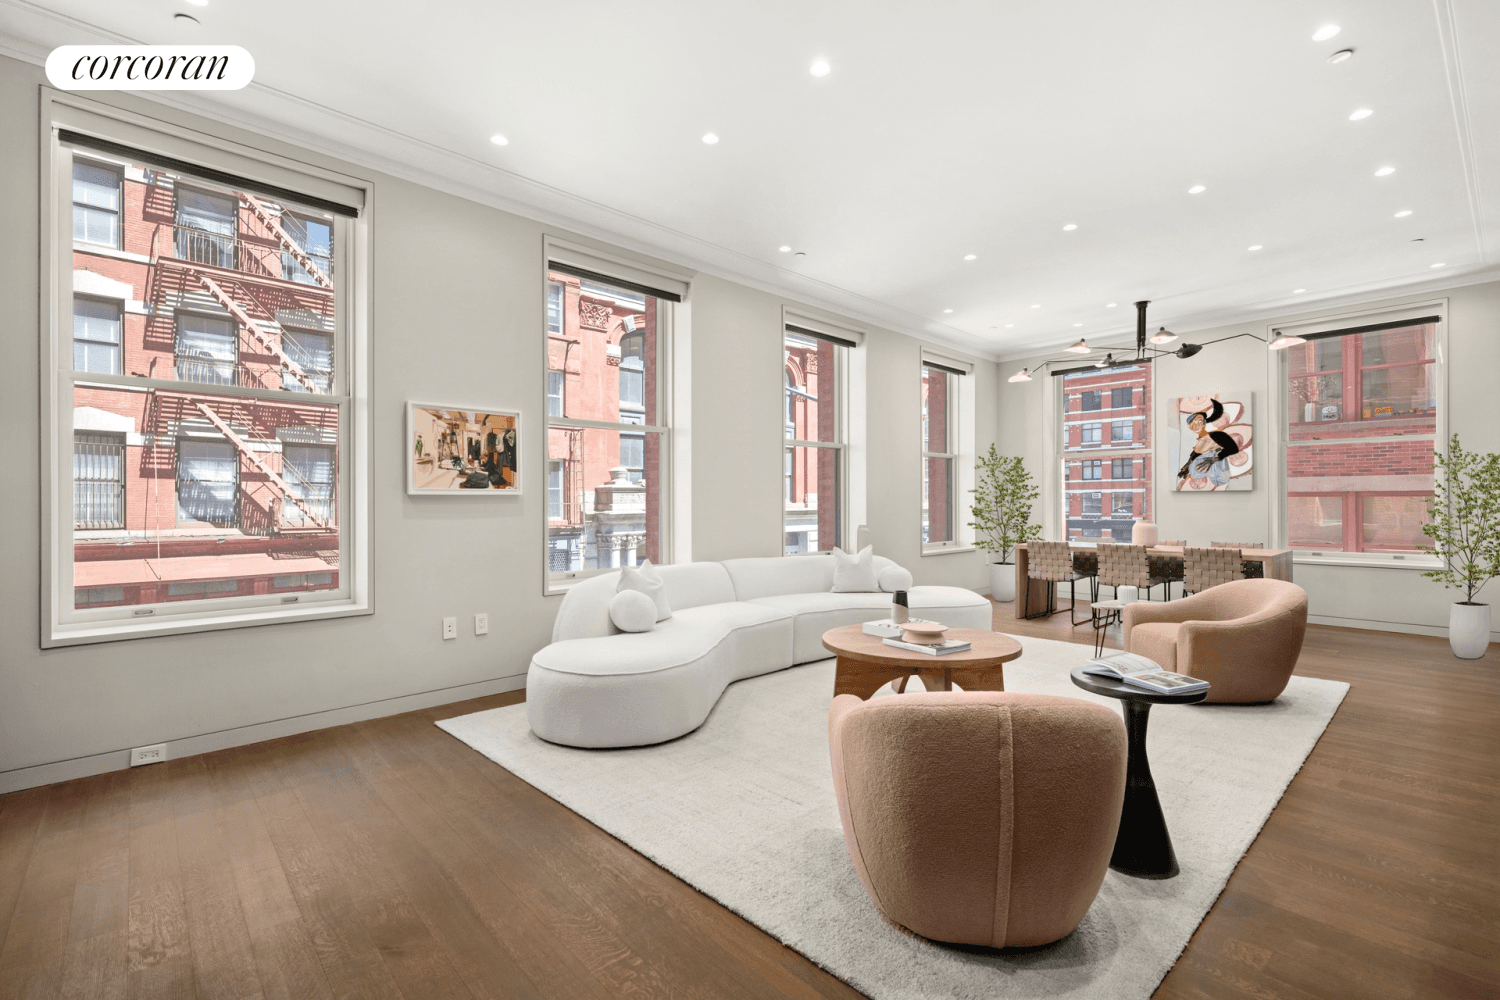 7 Harrison Street 2N Exquisite in every detail, this three bedroom, three bathroom loft boasts meticulously executed designer interiors, sprawling living space and private quarters, and mesmerizing historic Tribeca views ...